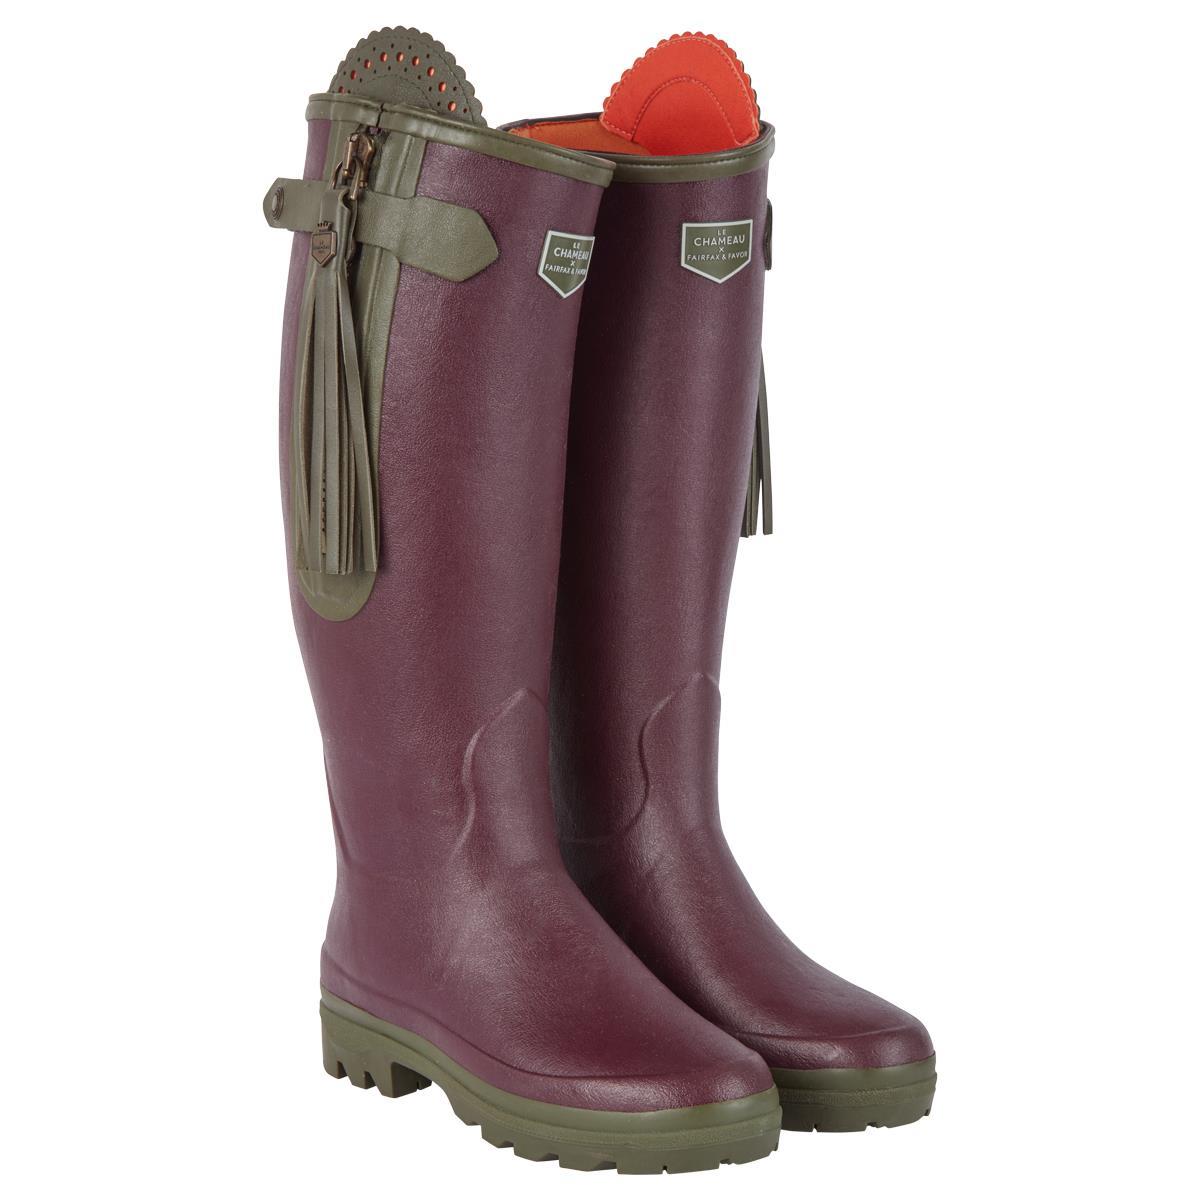 What sizes of Fairfax and Favor wellies are available for the L'Alliance Neo Boots?